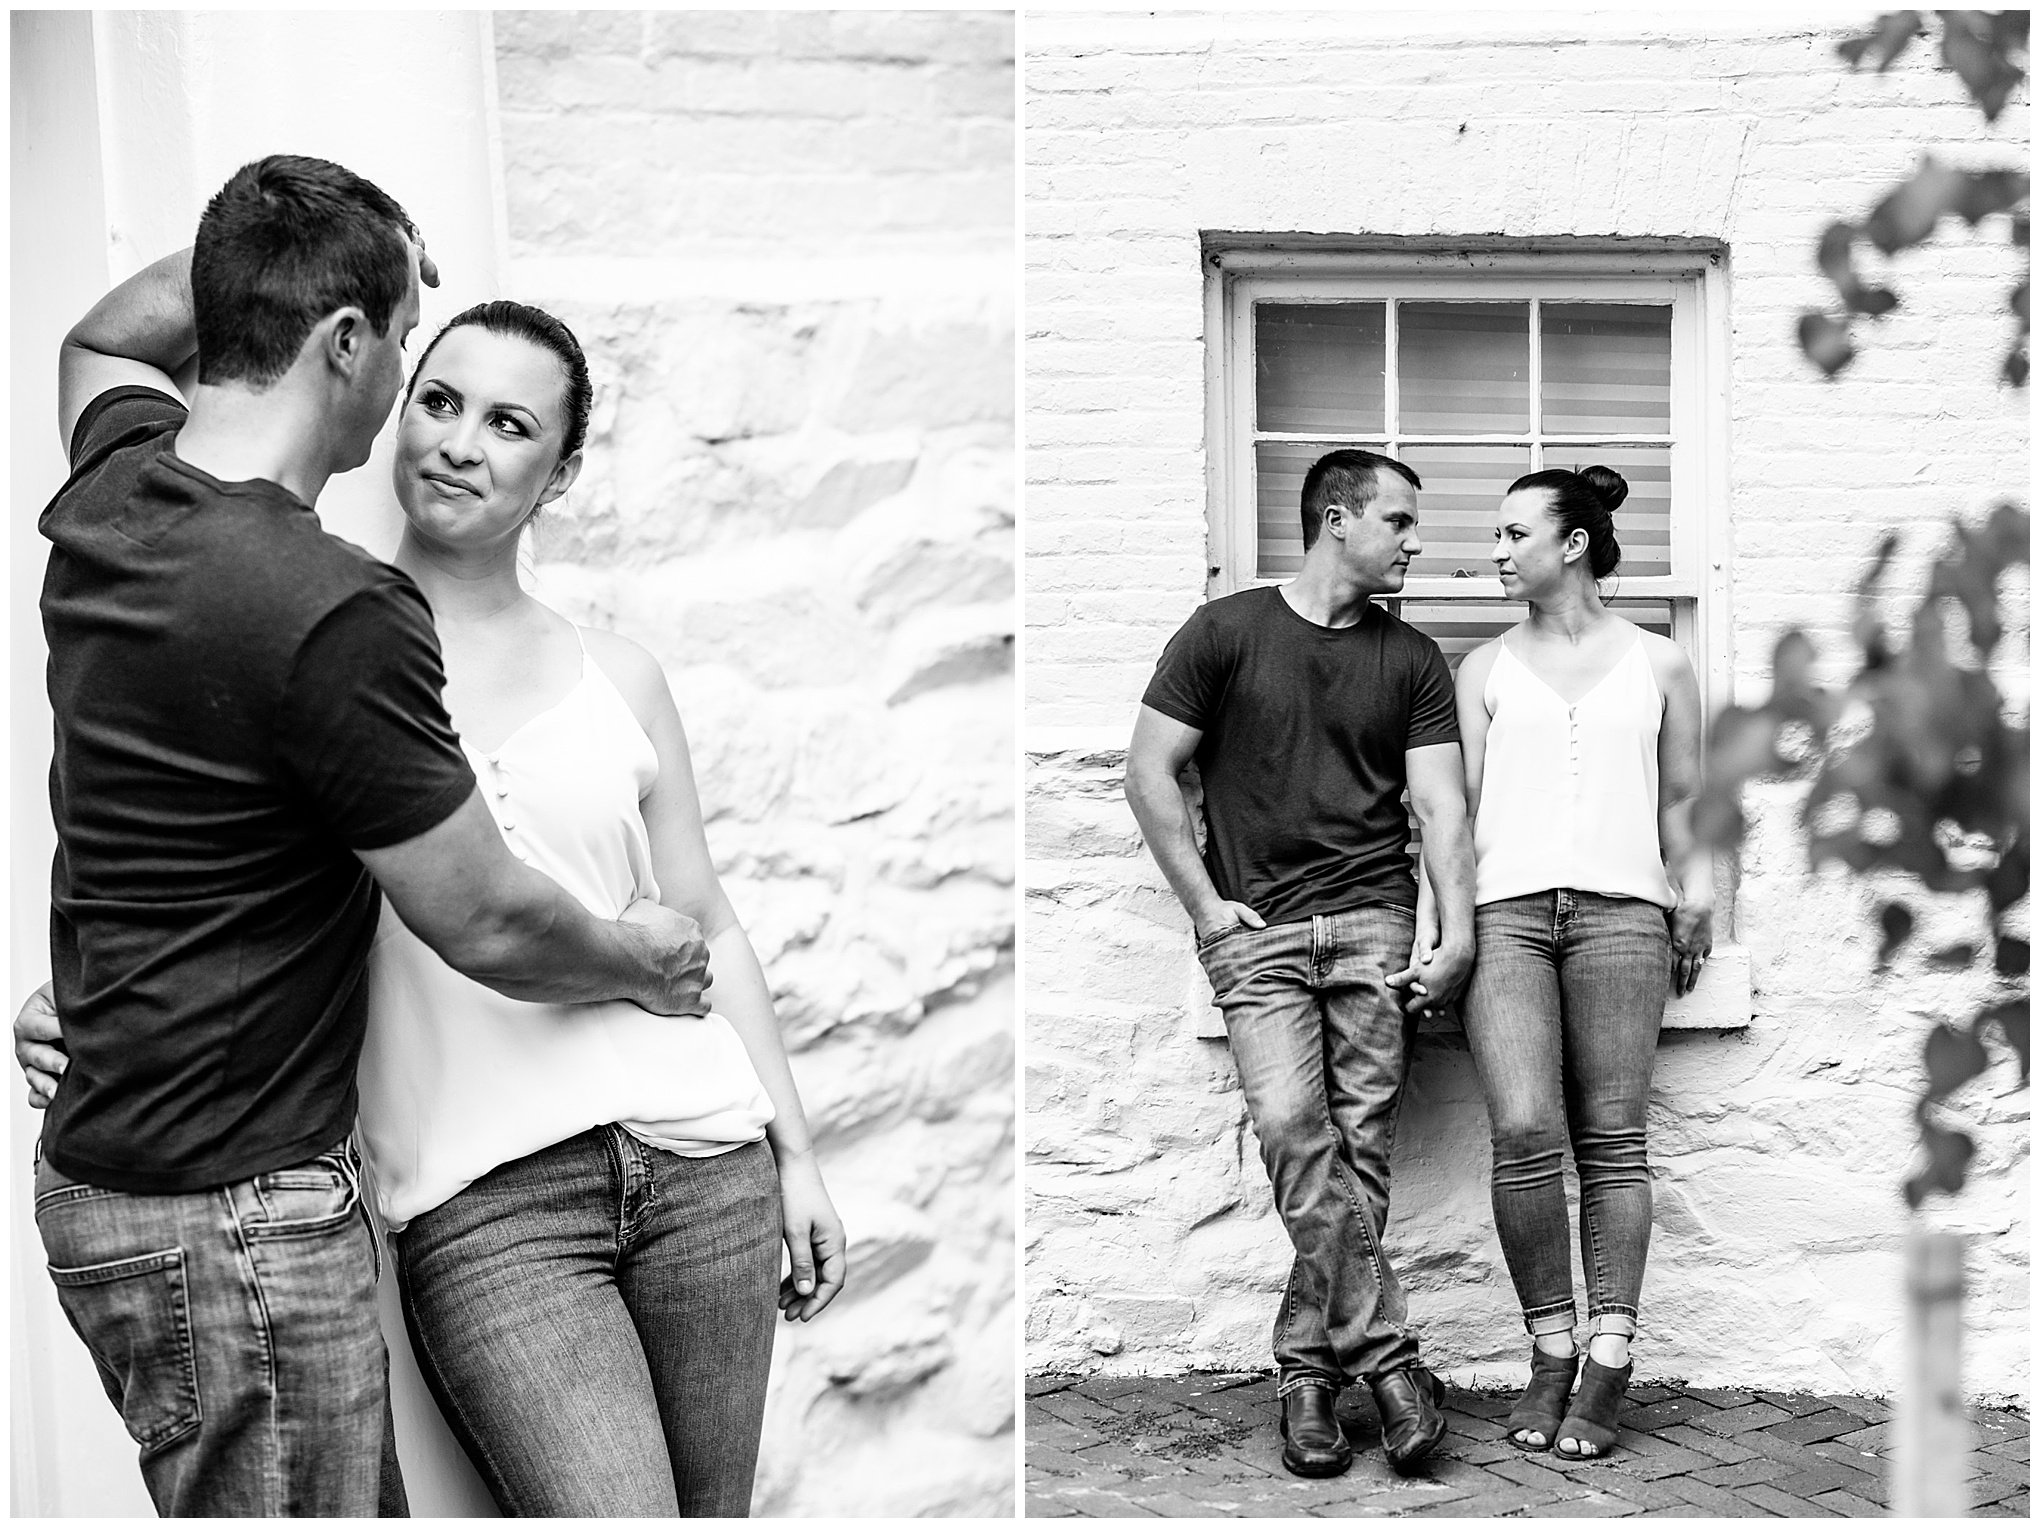 Carlyle House engagement photos, Carlyle House, Alexandria engagement photos, Old Town Alexandria engagement photos, Old Town Alexandria, Alexandria engagement photos, Alexandria Virginia, classic engagement photos, historic homes engagement photos, casual engagement photos, Rachel E.H. Photography, black and white engagement photos, romantic portraits, sexy engagement photos, black and white engagement photos